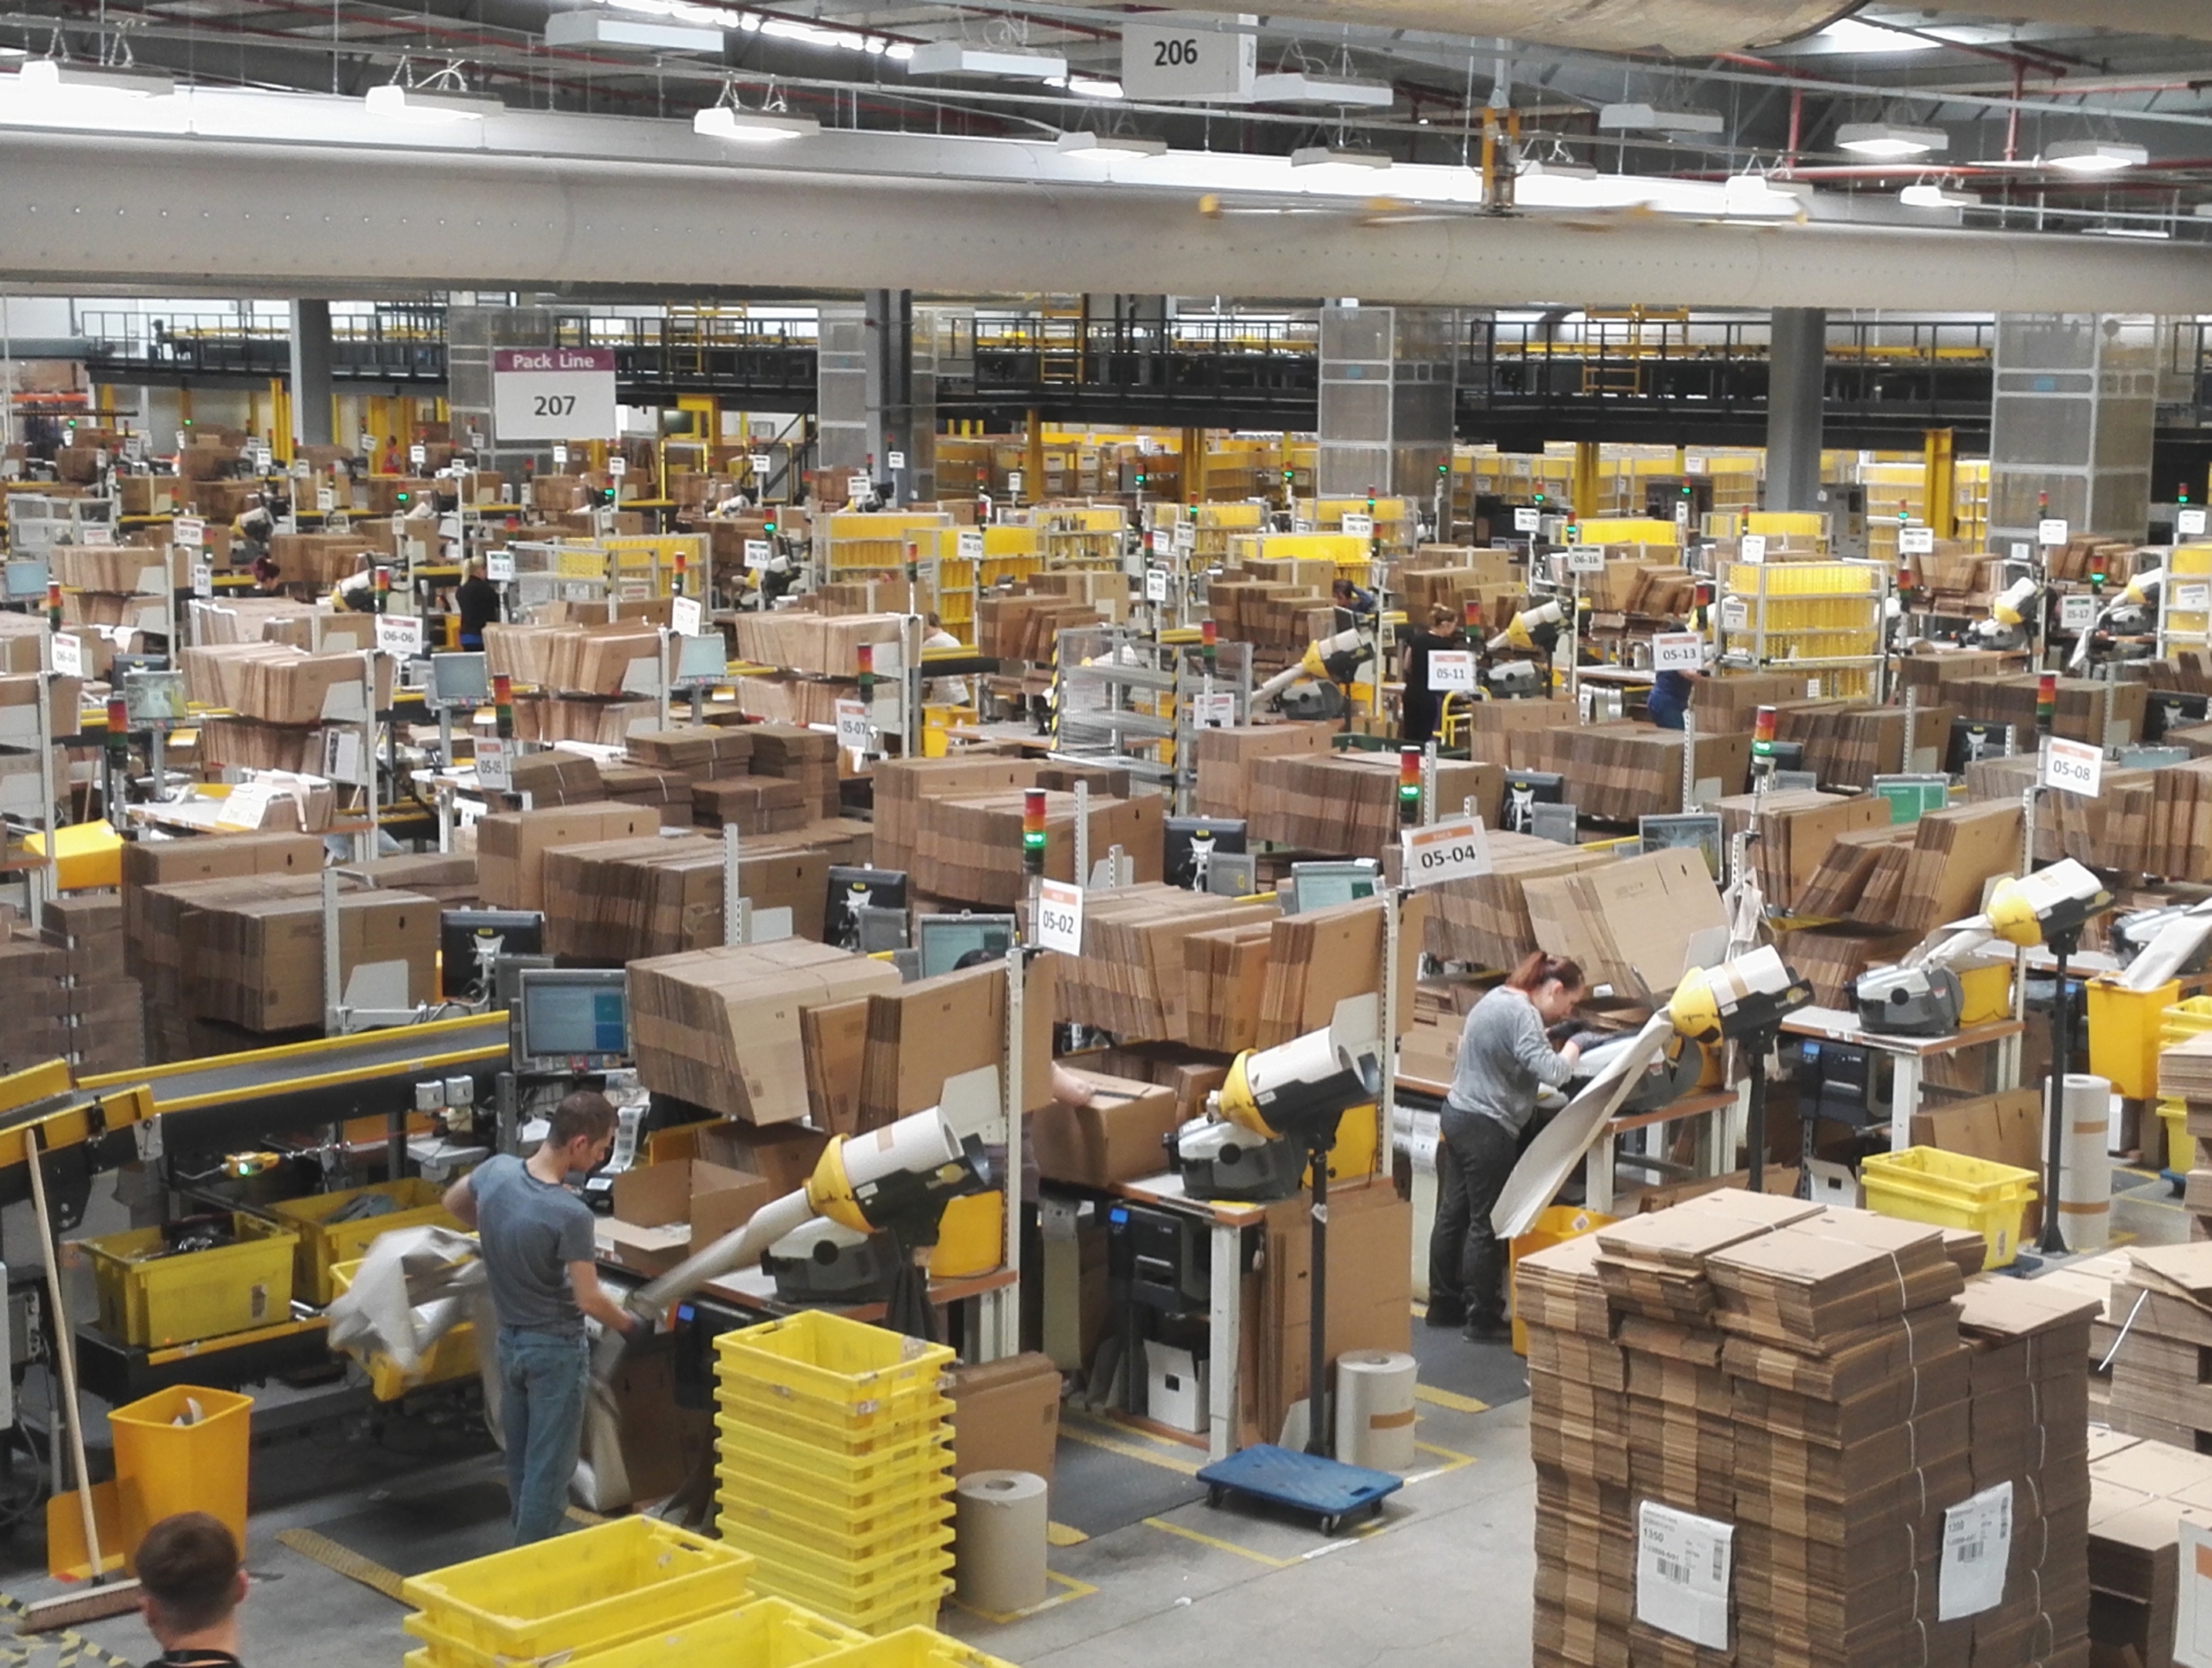 One of the main halls at Amazon's Dunfermline facility